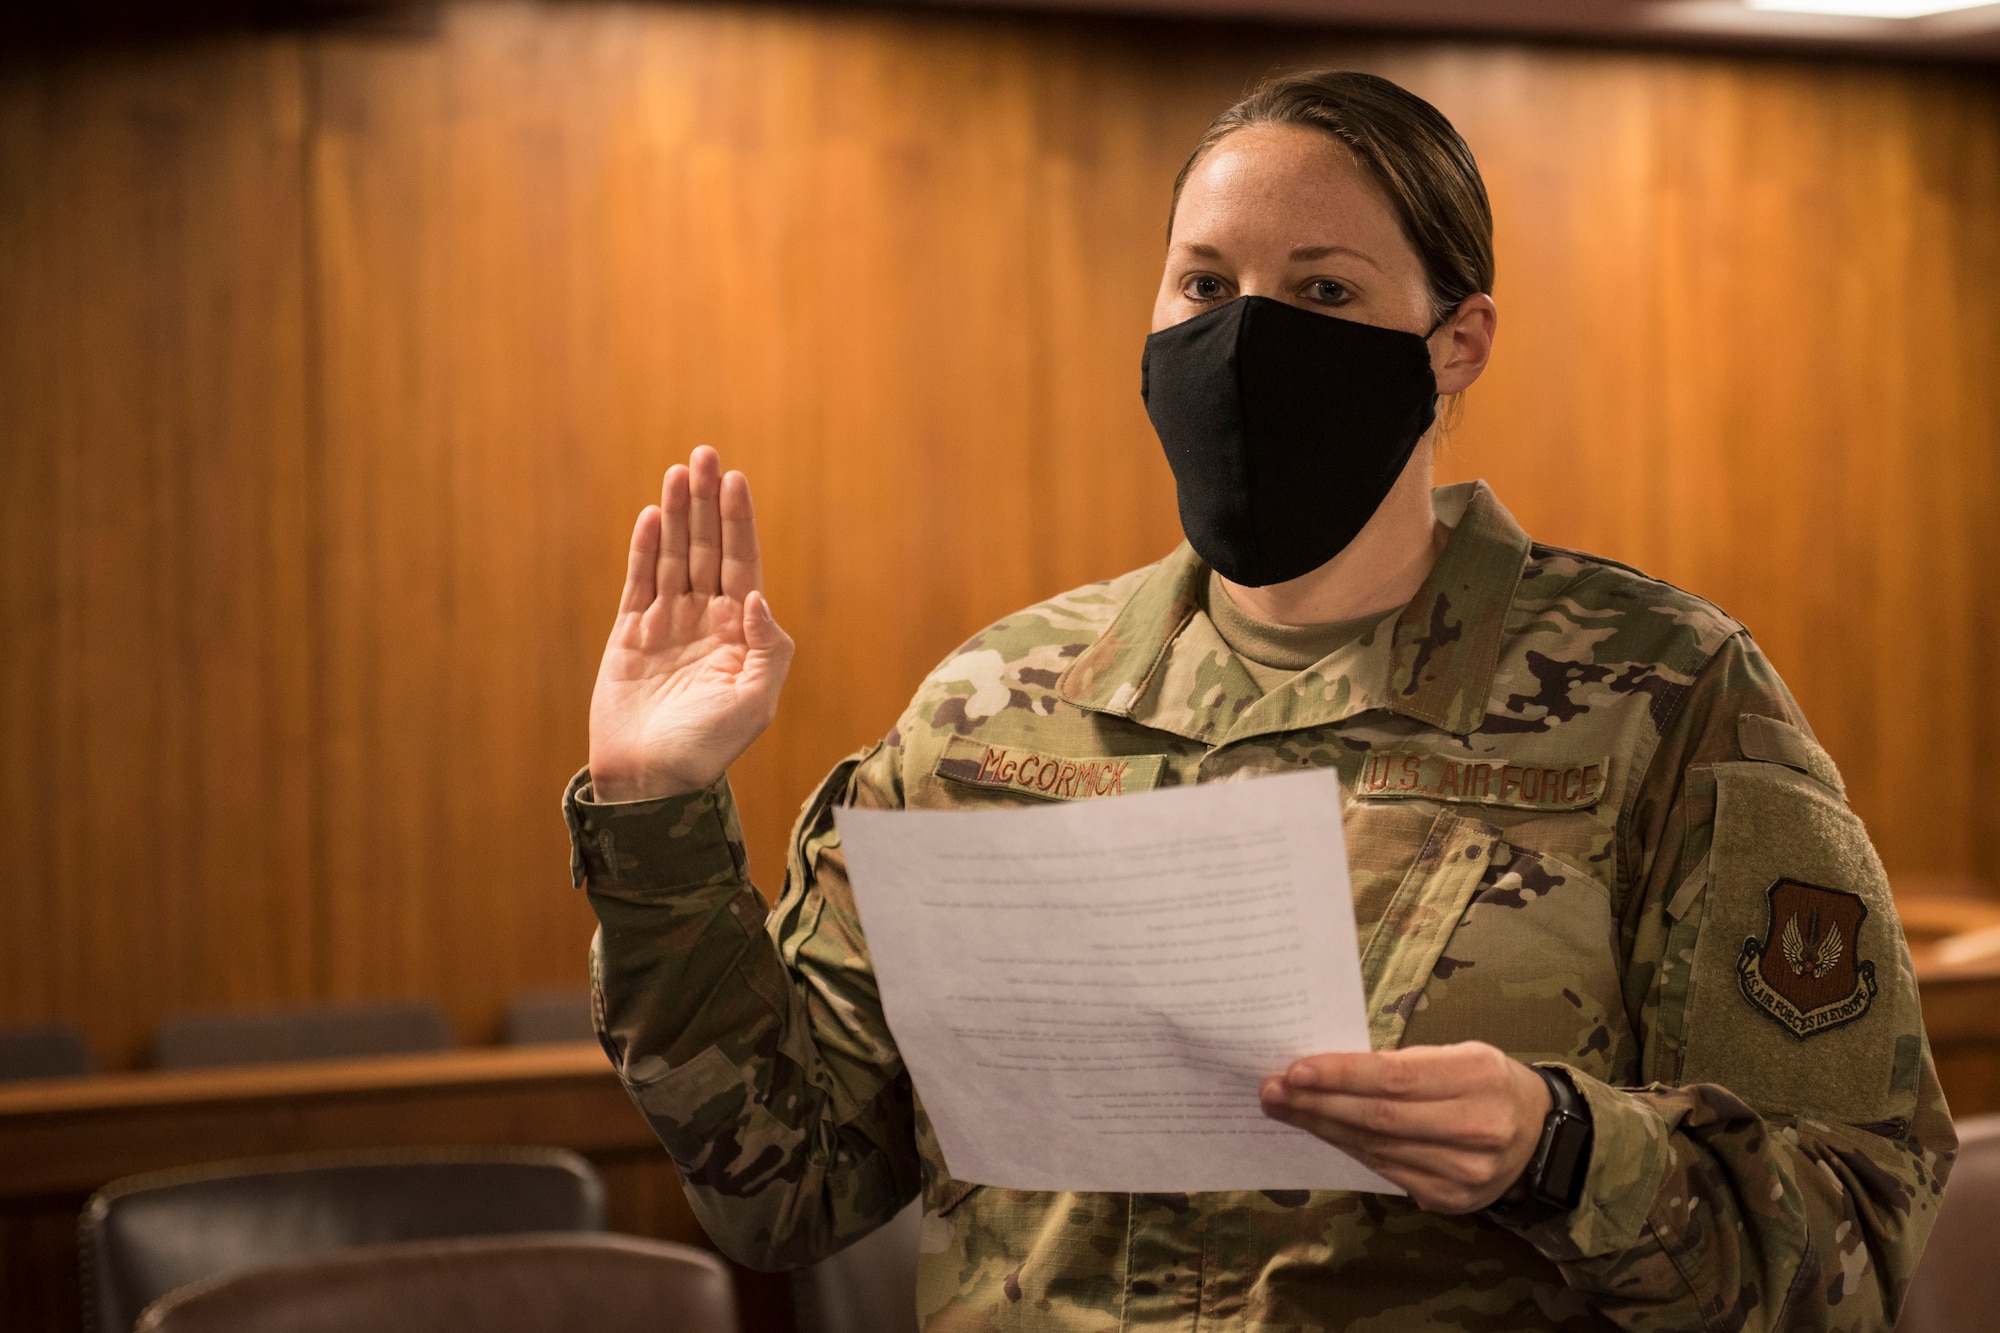 U.S. Air Force Capt. Lauren McCormick, 501st CSW Judge Advocate Office chief of operations and civil law, leads an oath during a will execution ceremony June 2, 2020, at RAF Alconbury, England. The 501st Combat Support Wing legal office hosted a deployment brief and will execution ceremony for all Security Forces deploying in the next 60 days. (U.S. Air Force photo by Airman 1st Class Jennifer Zima)